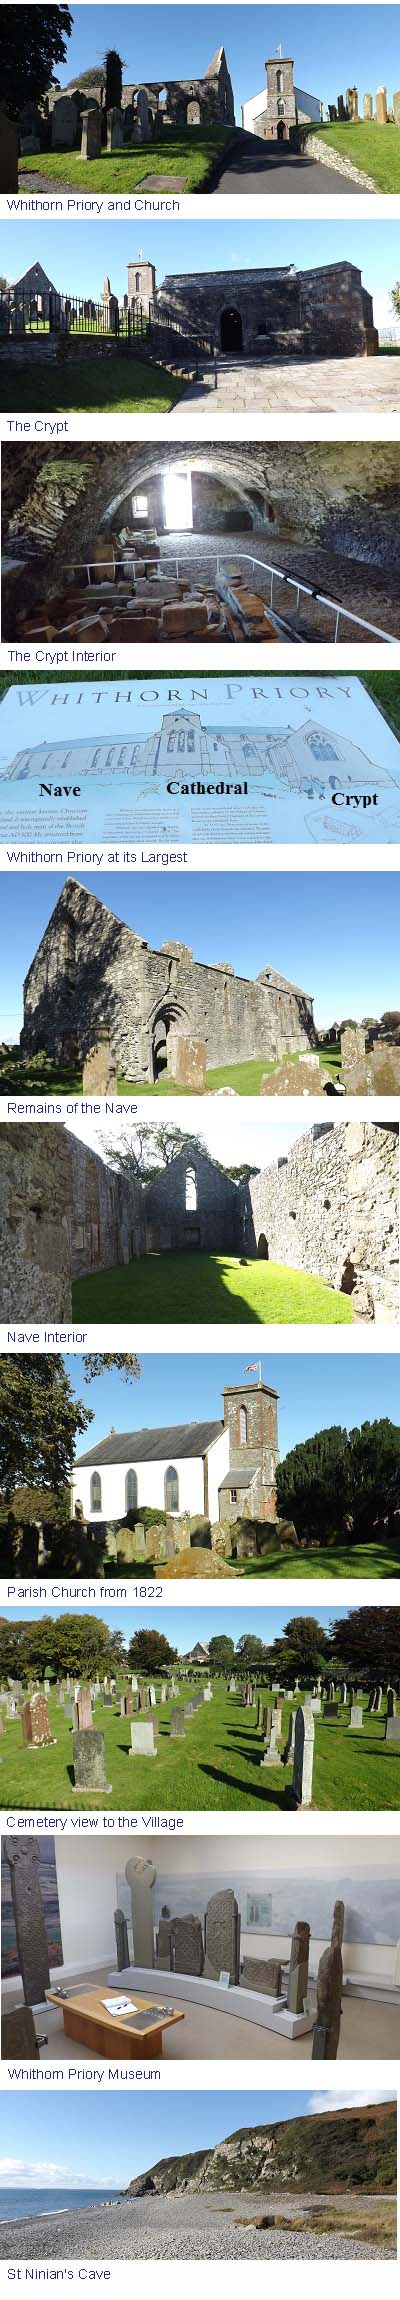 Whithorn Priory Images